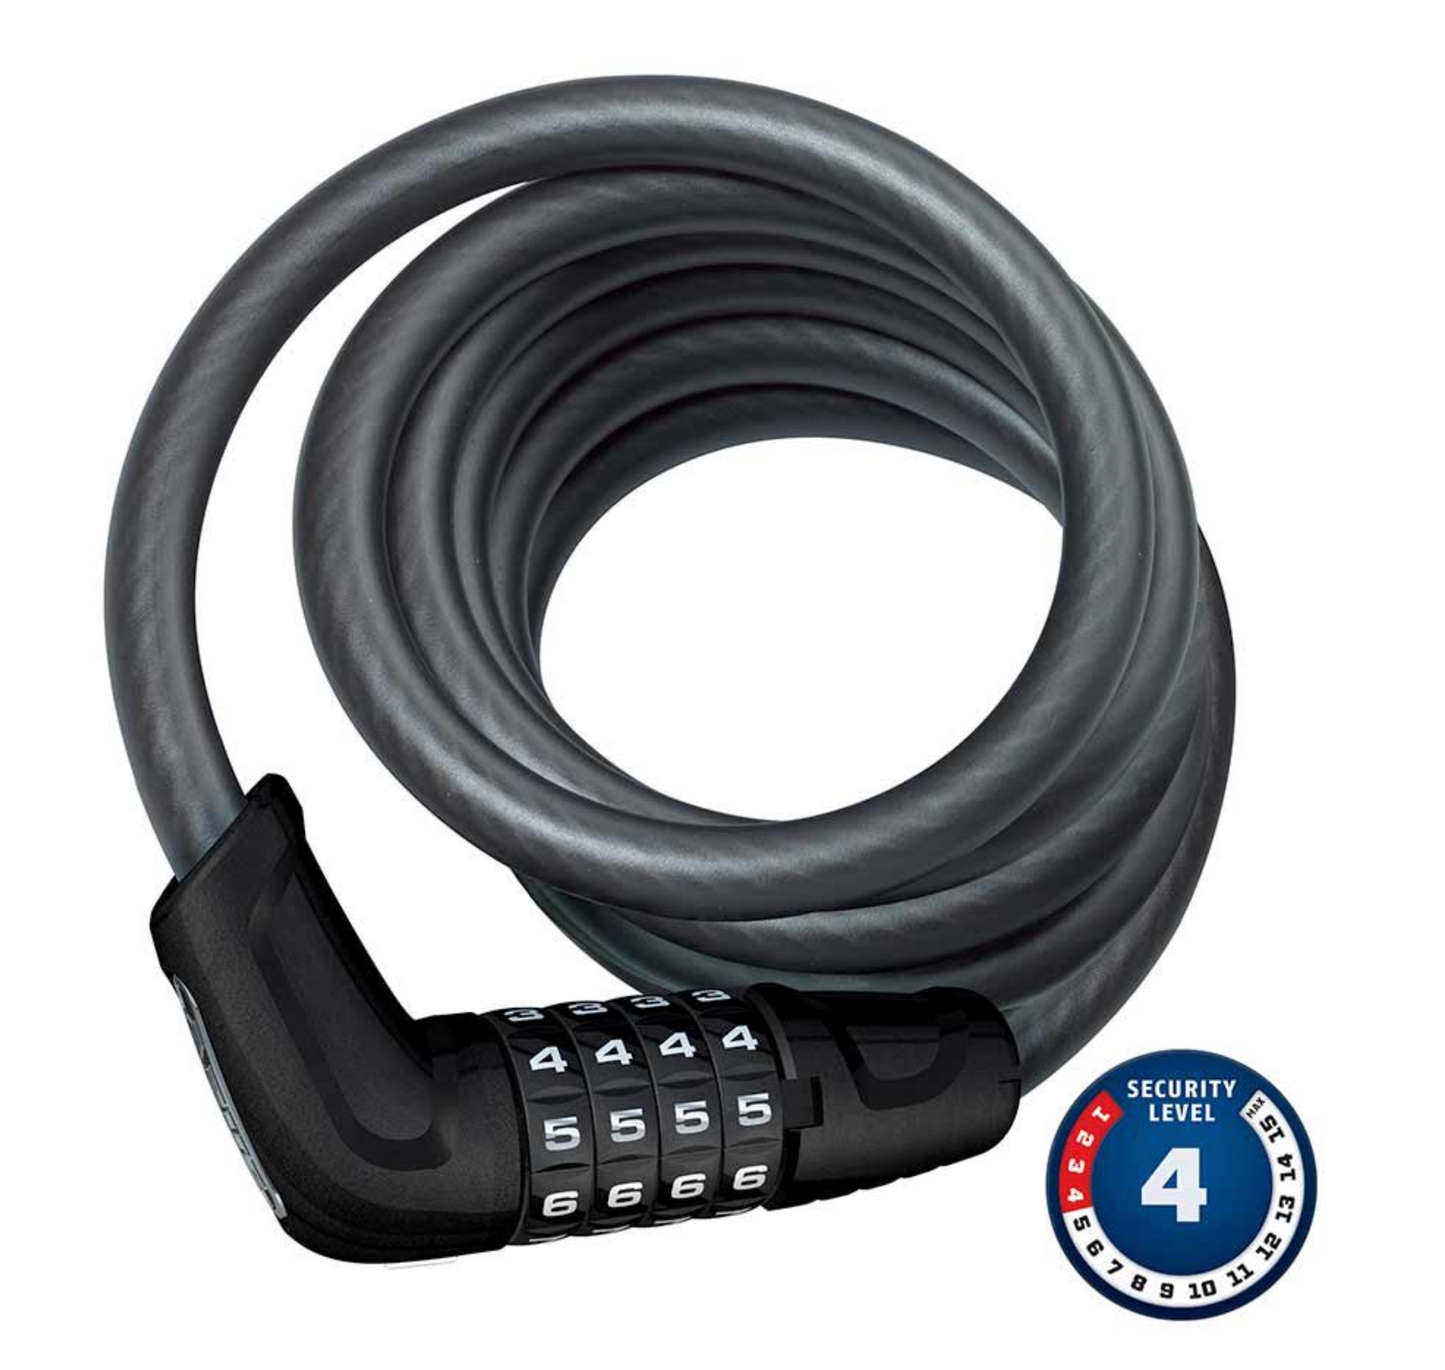 Abus, Tresor 6512C, Cable with 4 digit combination lock, 12mm x 180cm (12mm x 5.9')